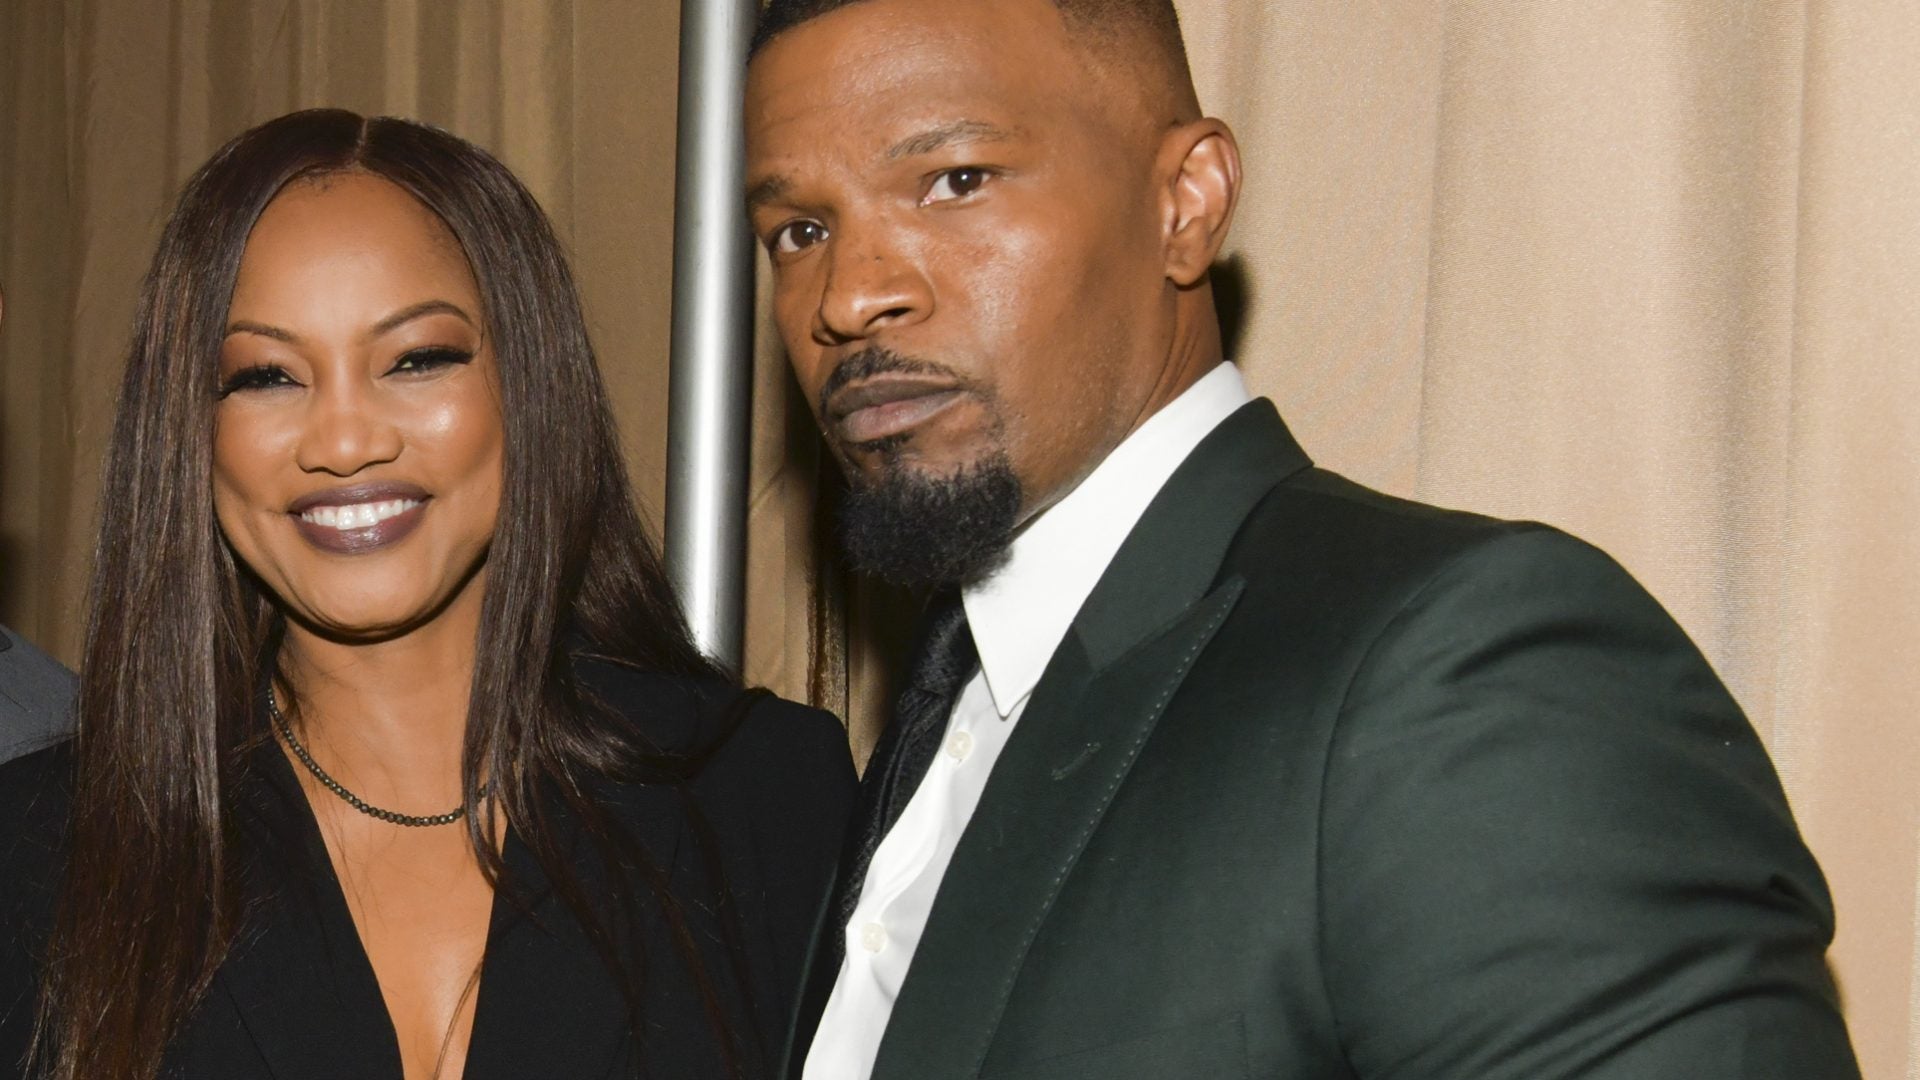 Garcelle Beauvais Just Revealed a Sexy Secret About Jamie Foxx (Her Crush)